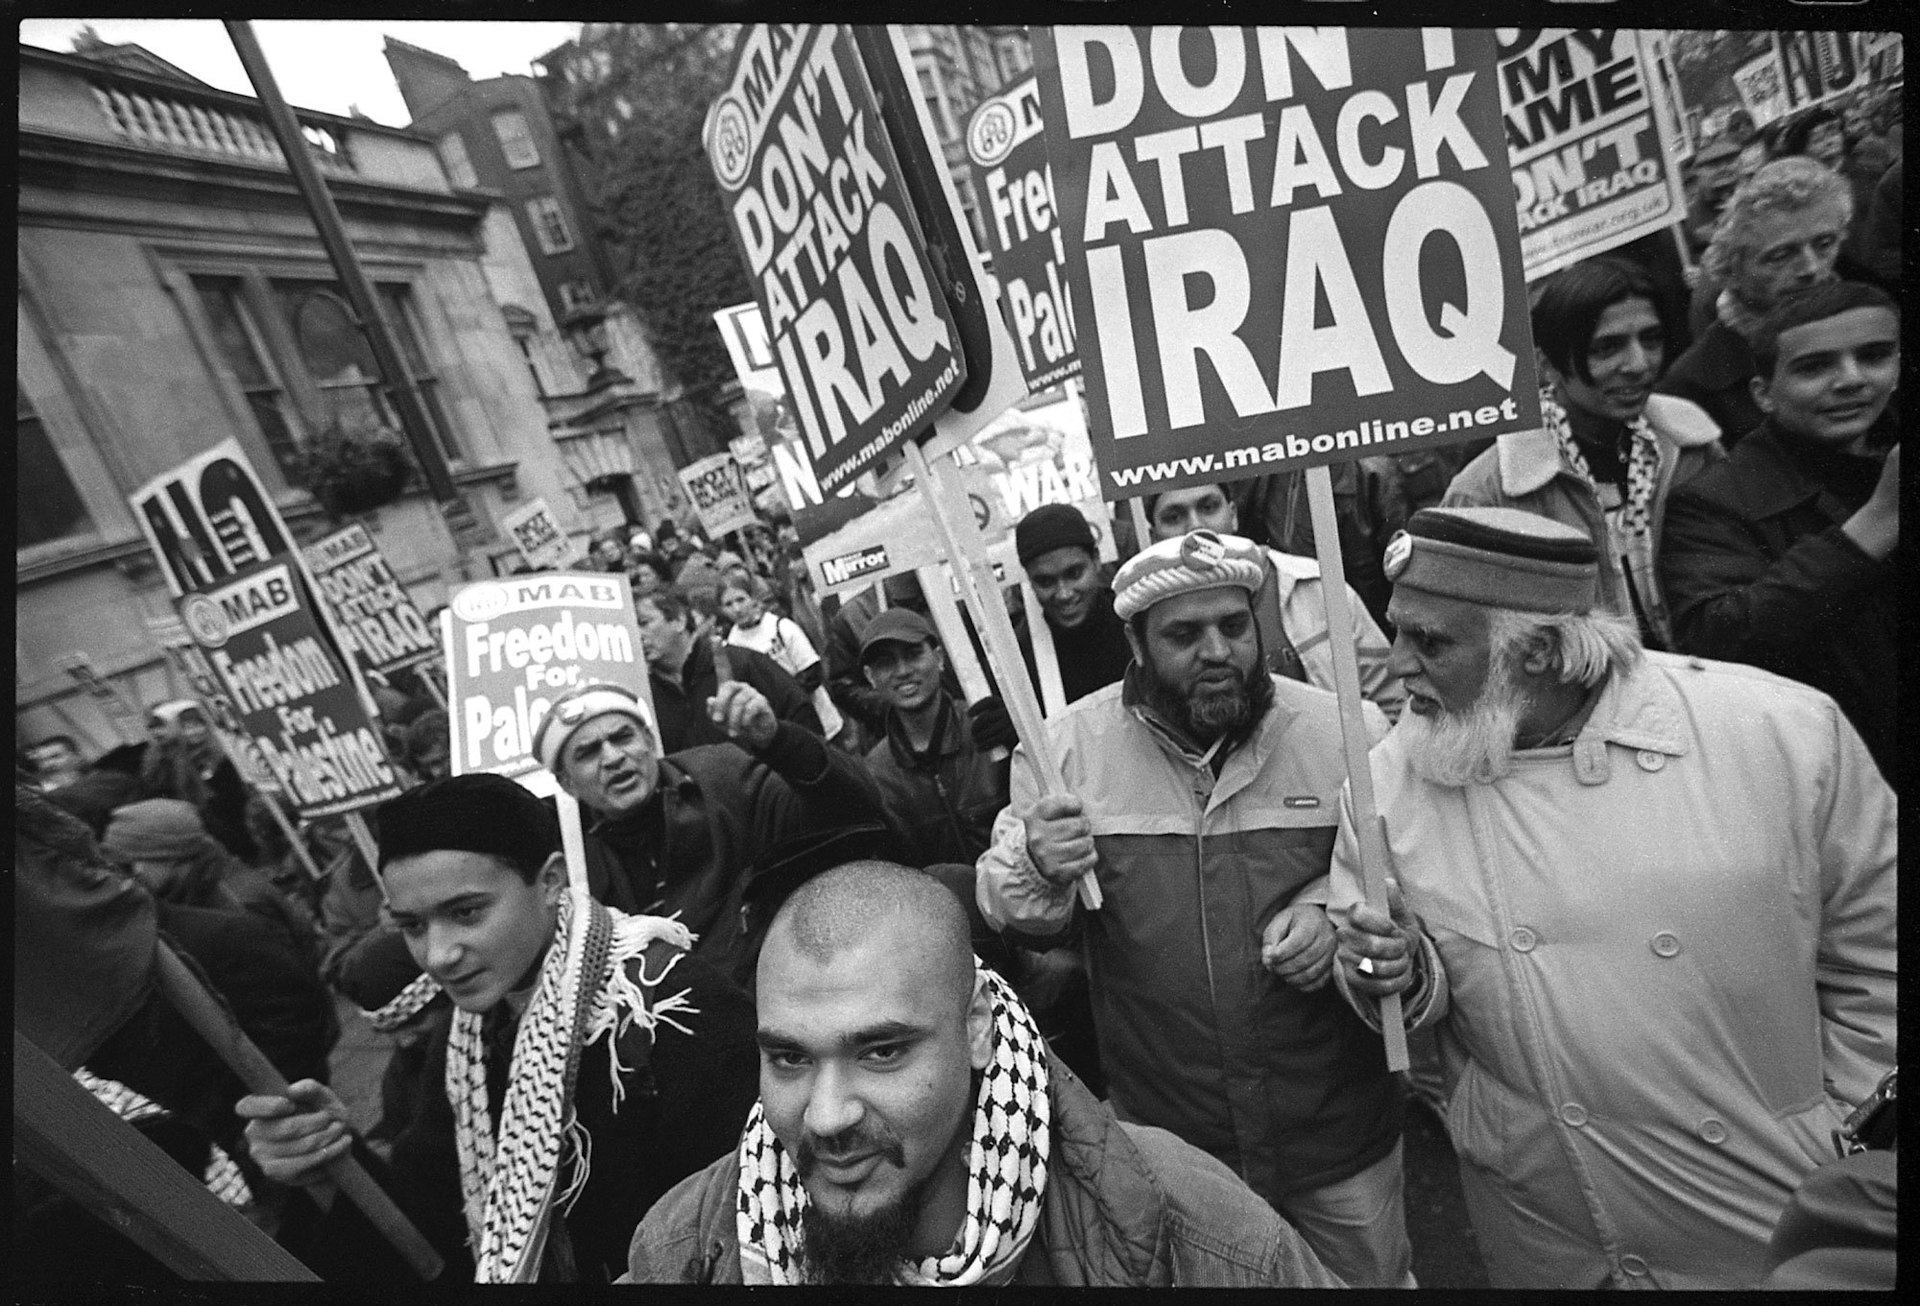 Millions marched against the war in Iraq - don't let those responsible forget